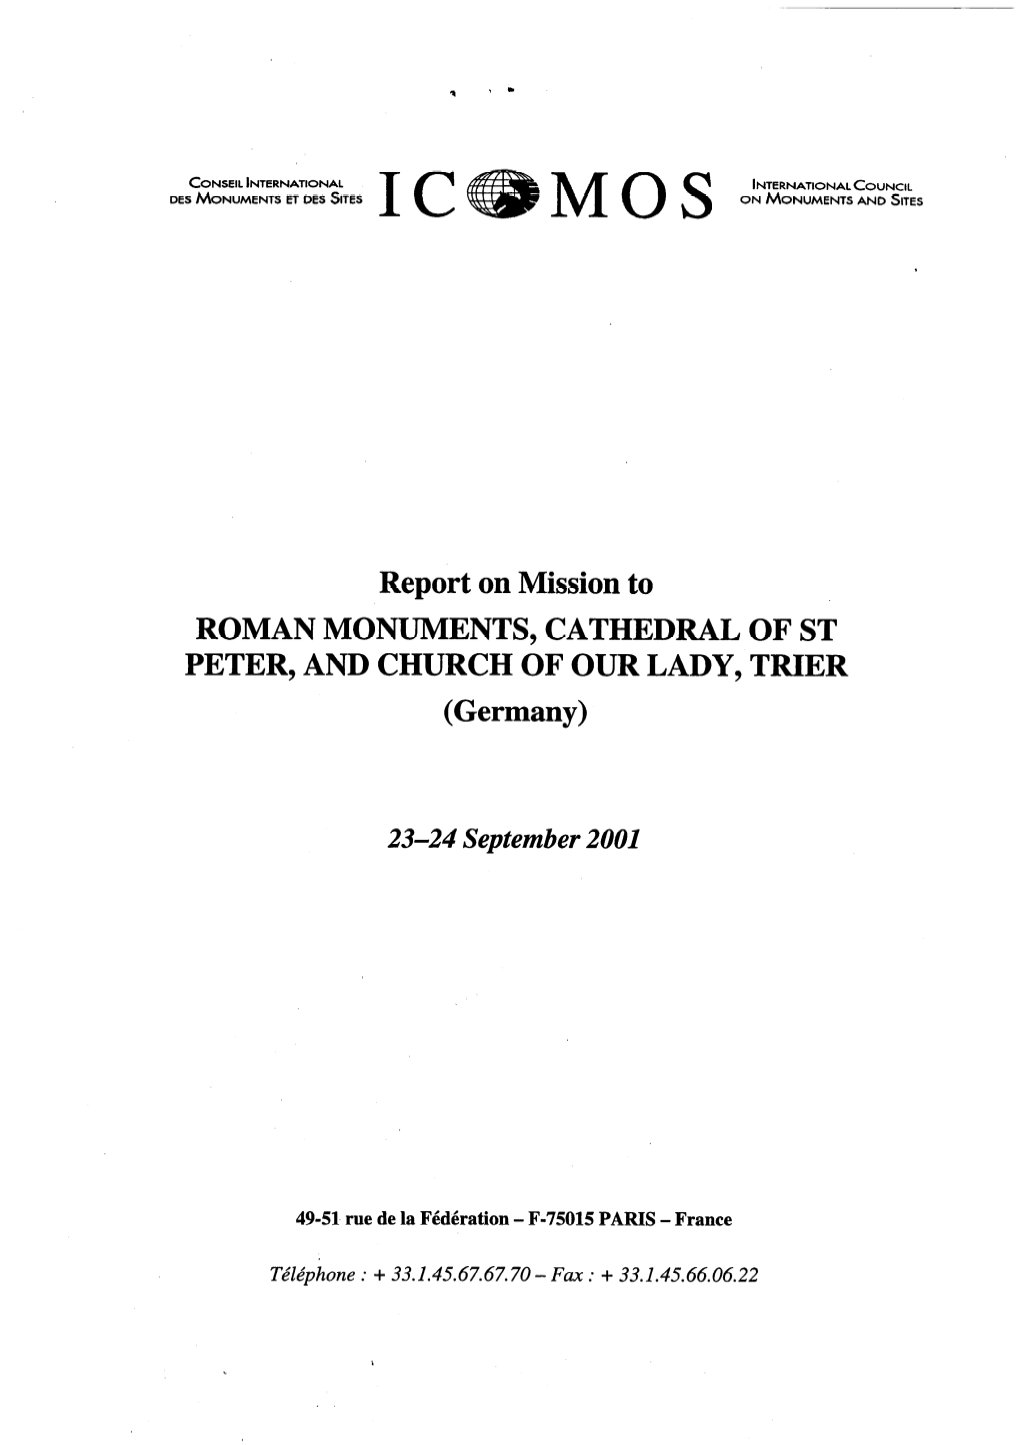 Report on Mission to ROMAN MONUMENTS, CATHEDRAL of ST PETER, and CHURCH of OUR LADY, TRIER (Germany)